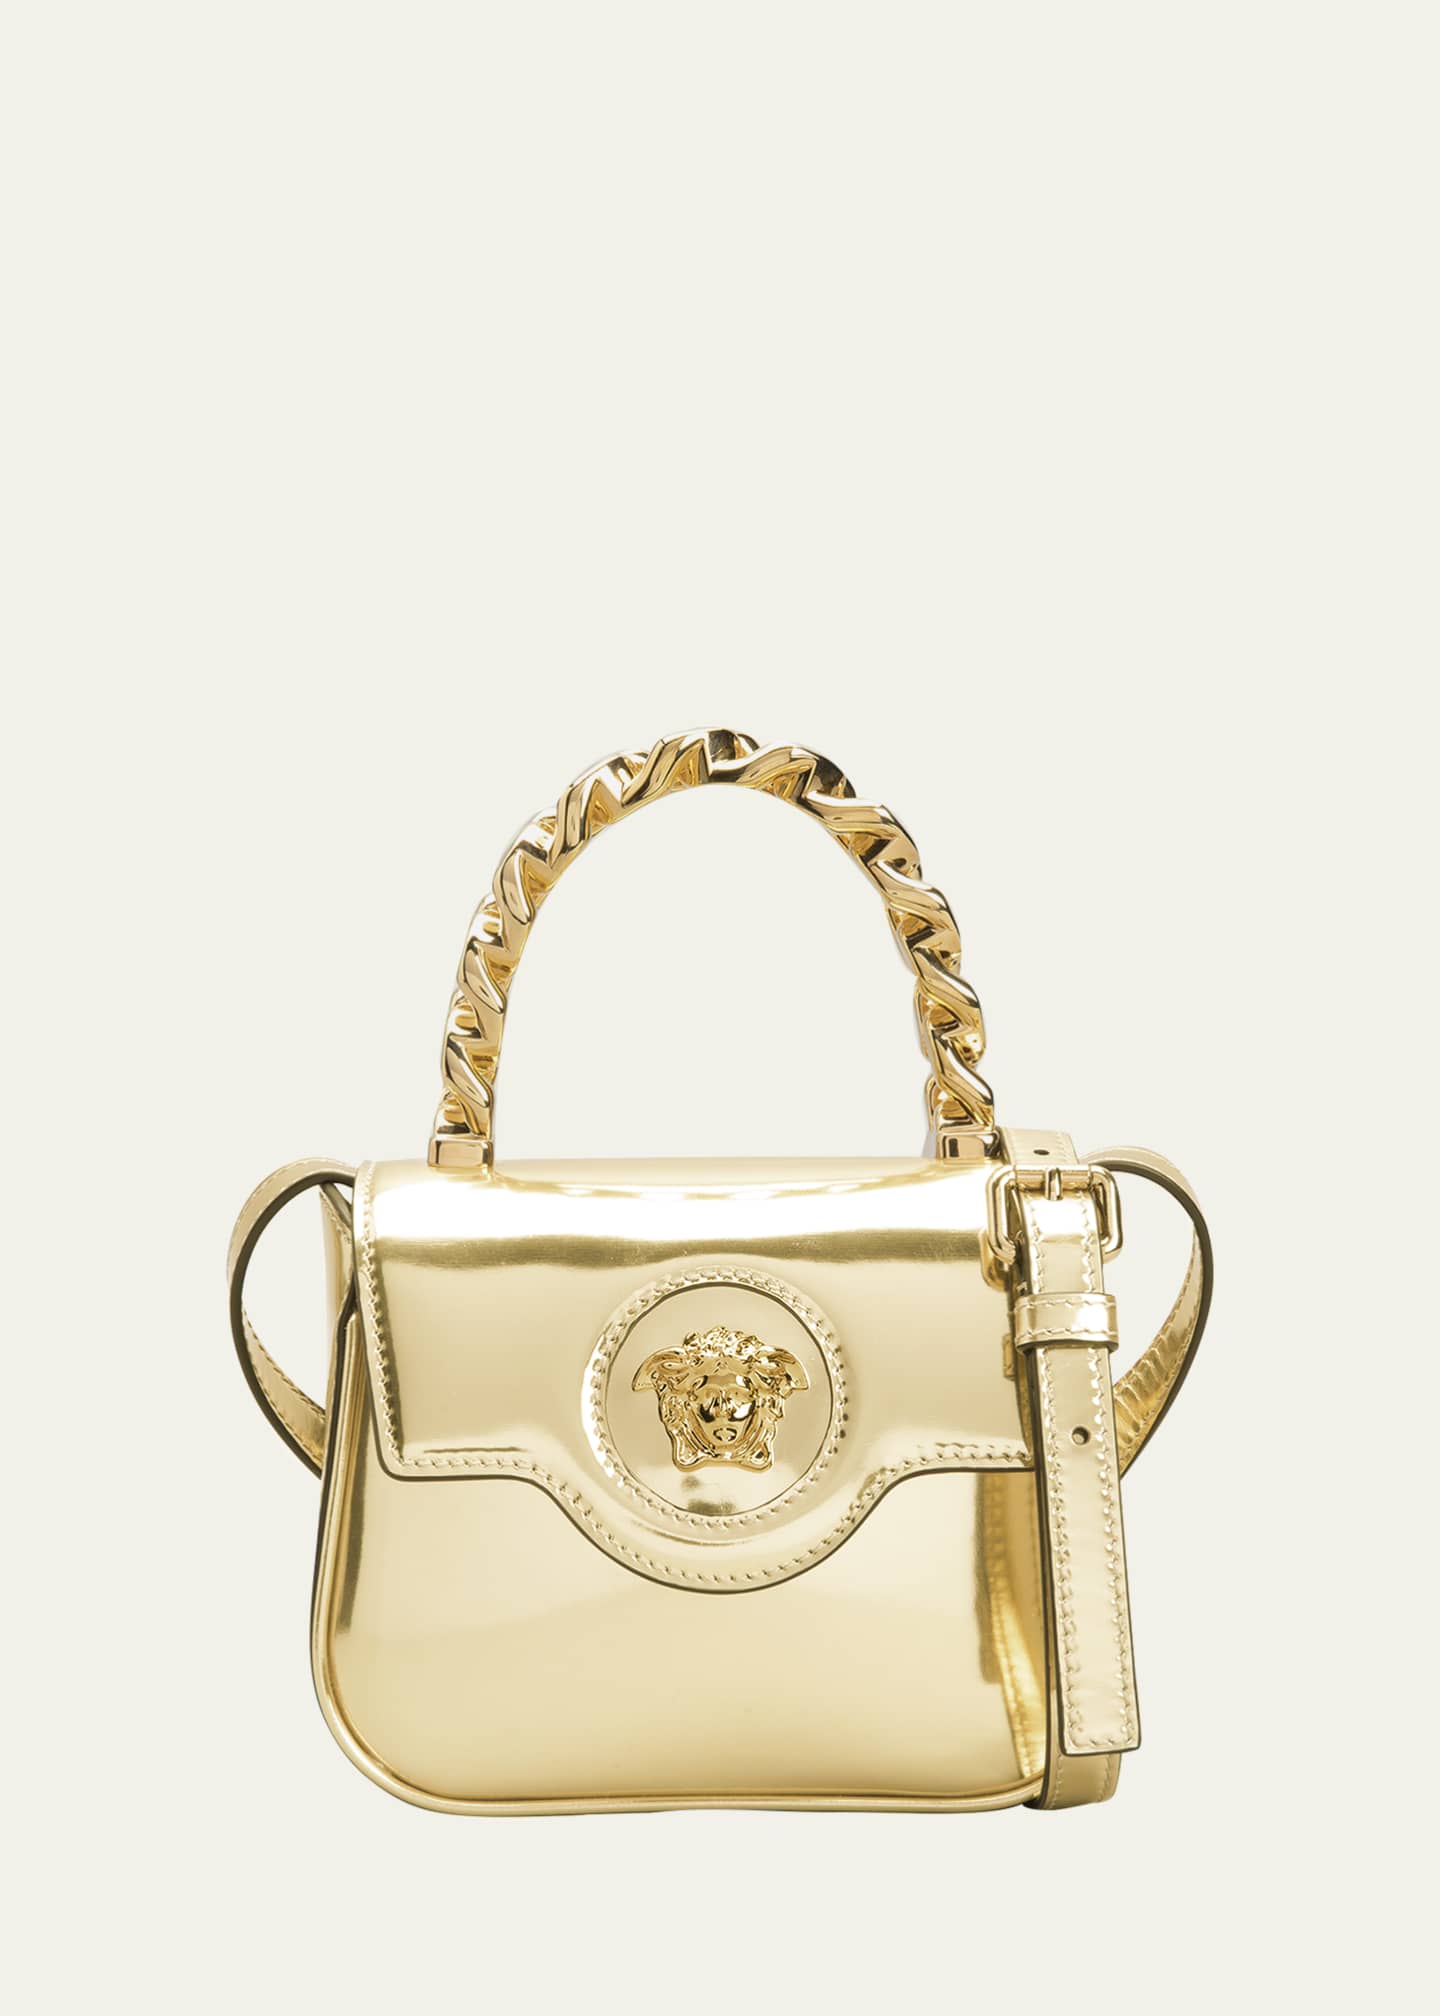 Buy Versace Bags: Tote Bags, Pouches & More